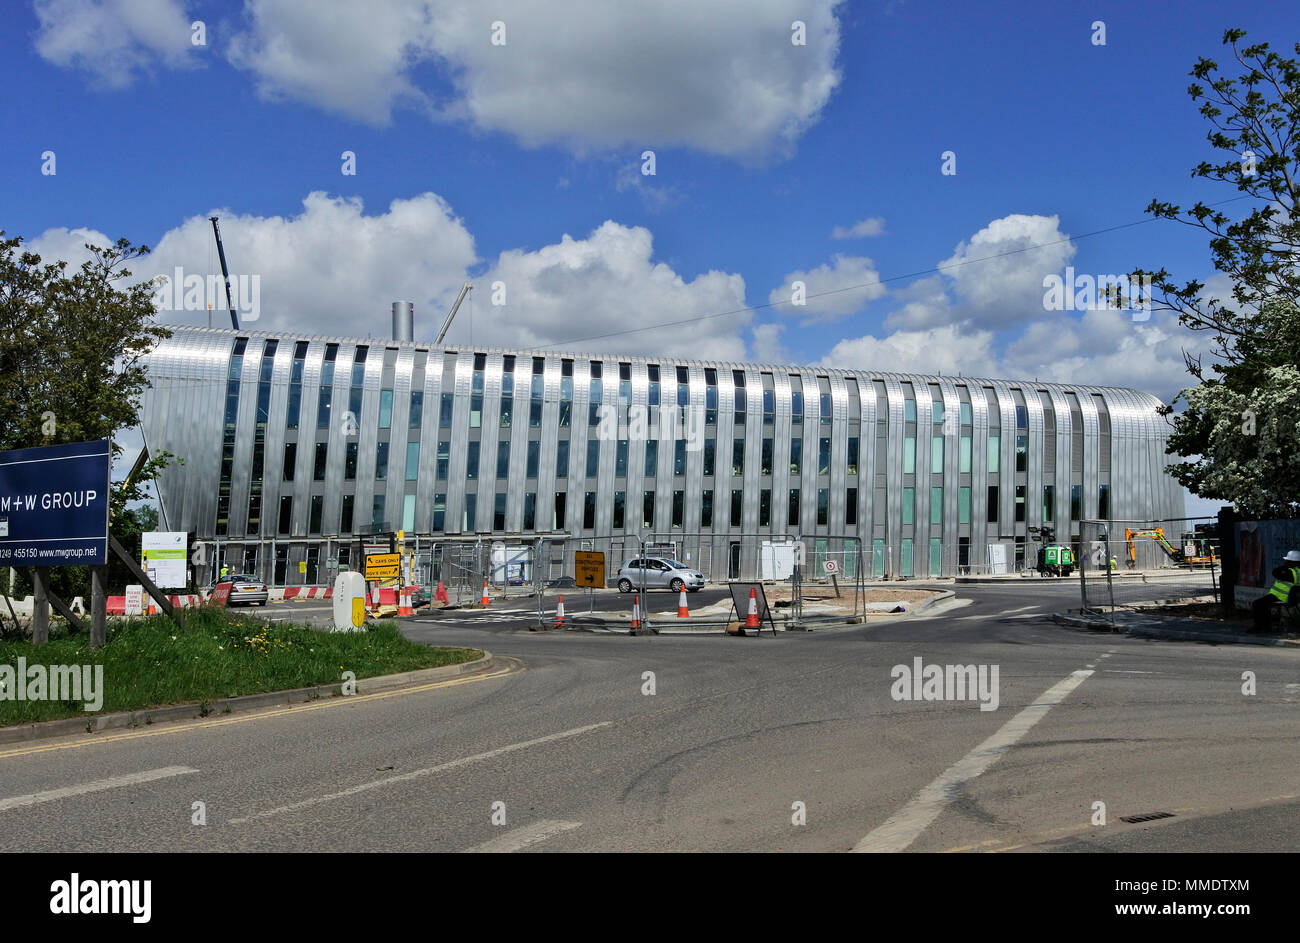 Charlton Lane High Resolution Stock Photography and Images - Alamy